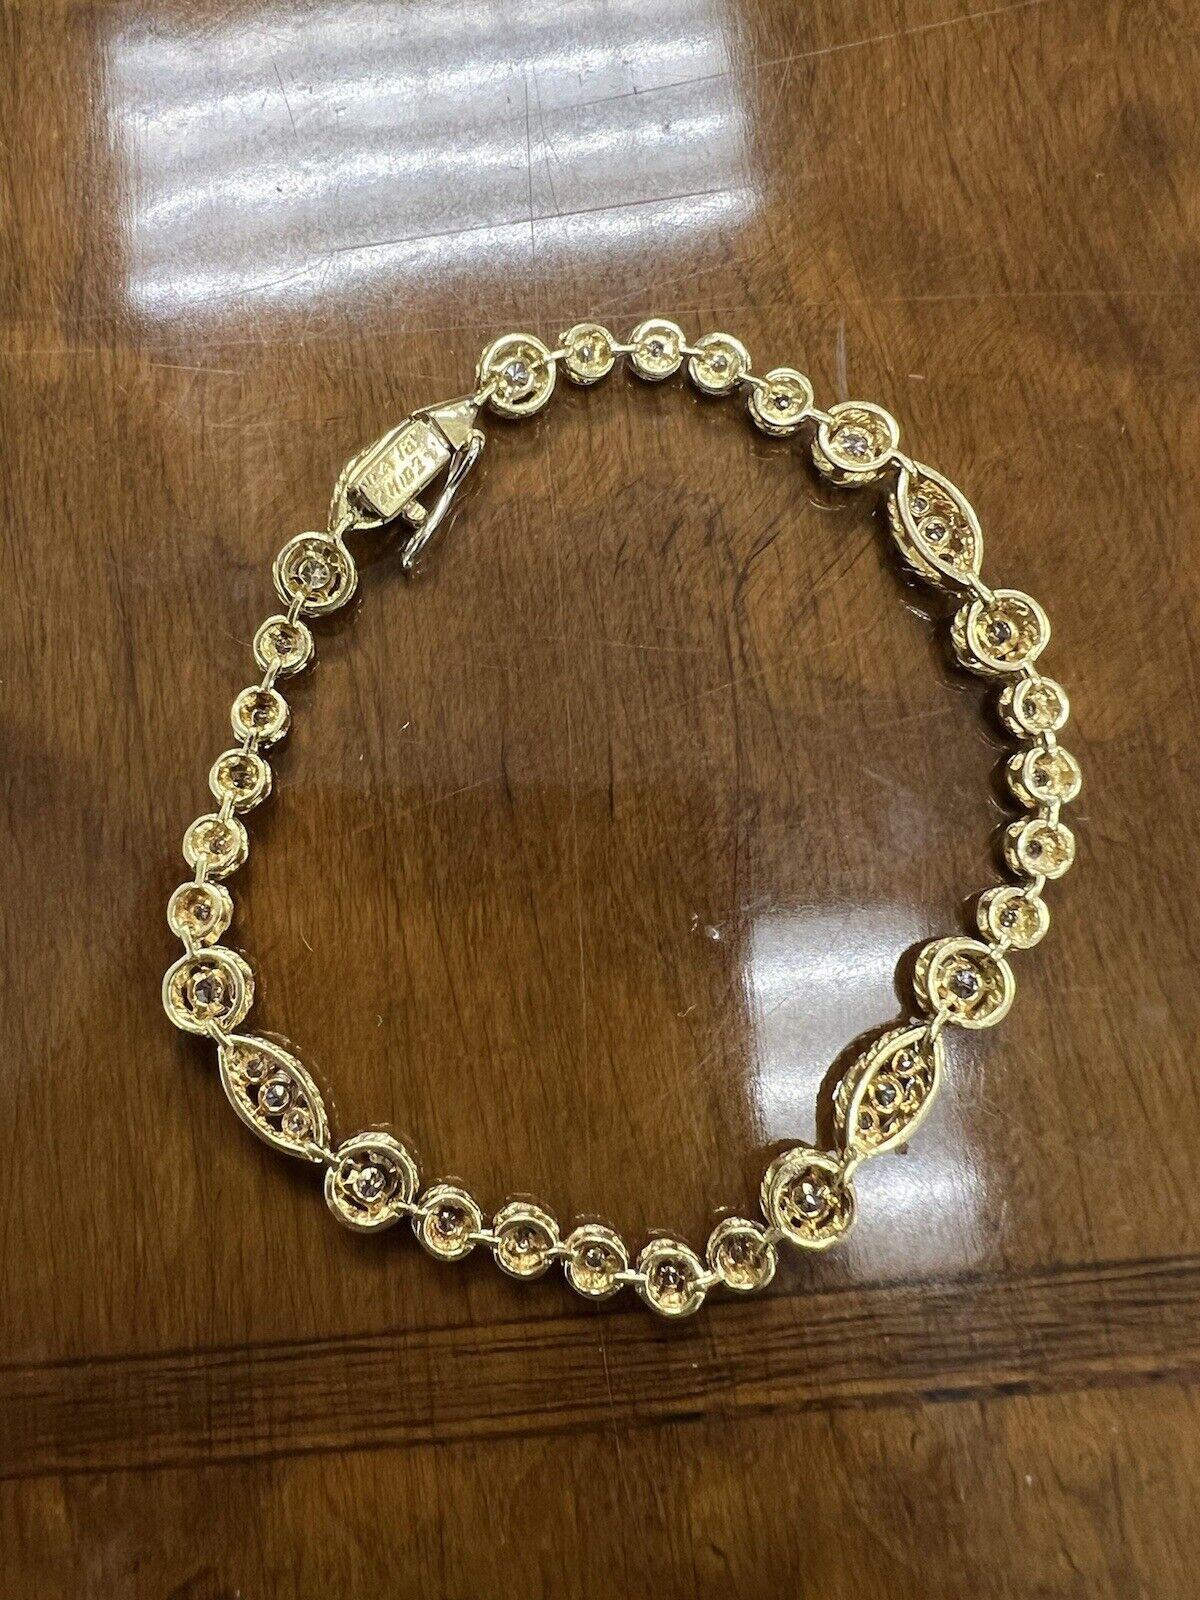 Van Cleef & Arpels NY 18k Yellow Gold & Diamond Bracelet Vintage 1960s

Here is your chance to purchase a beautiful and highly collectible designer bracelet.  Truly a great piece at a great price! 

Details:
Size : 7.25 inches
12.3 grams
Fully